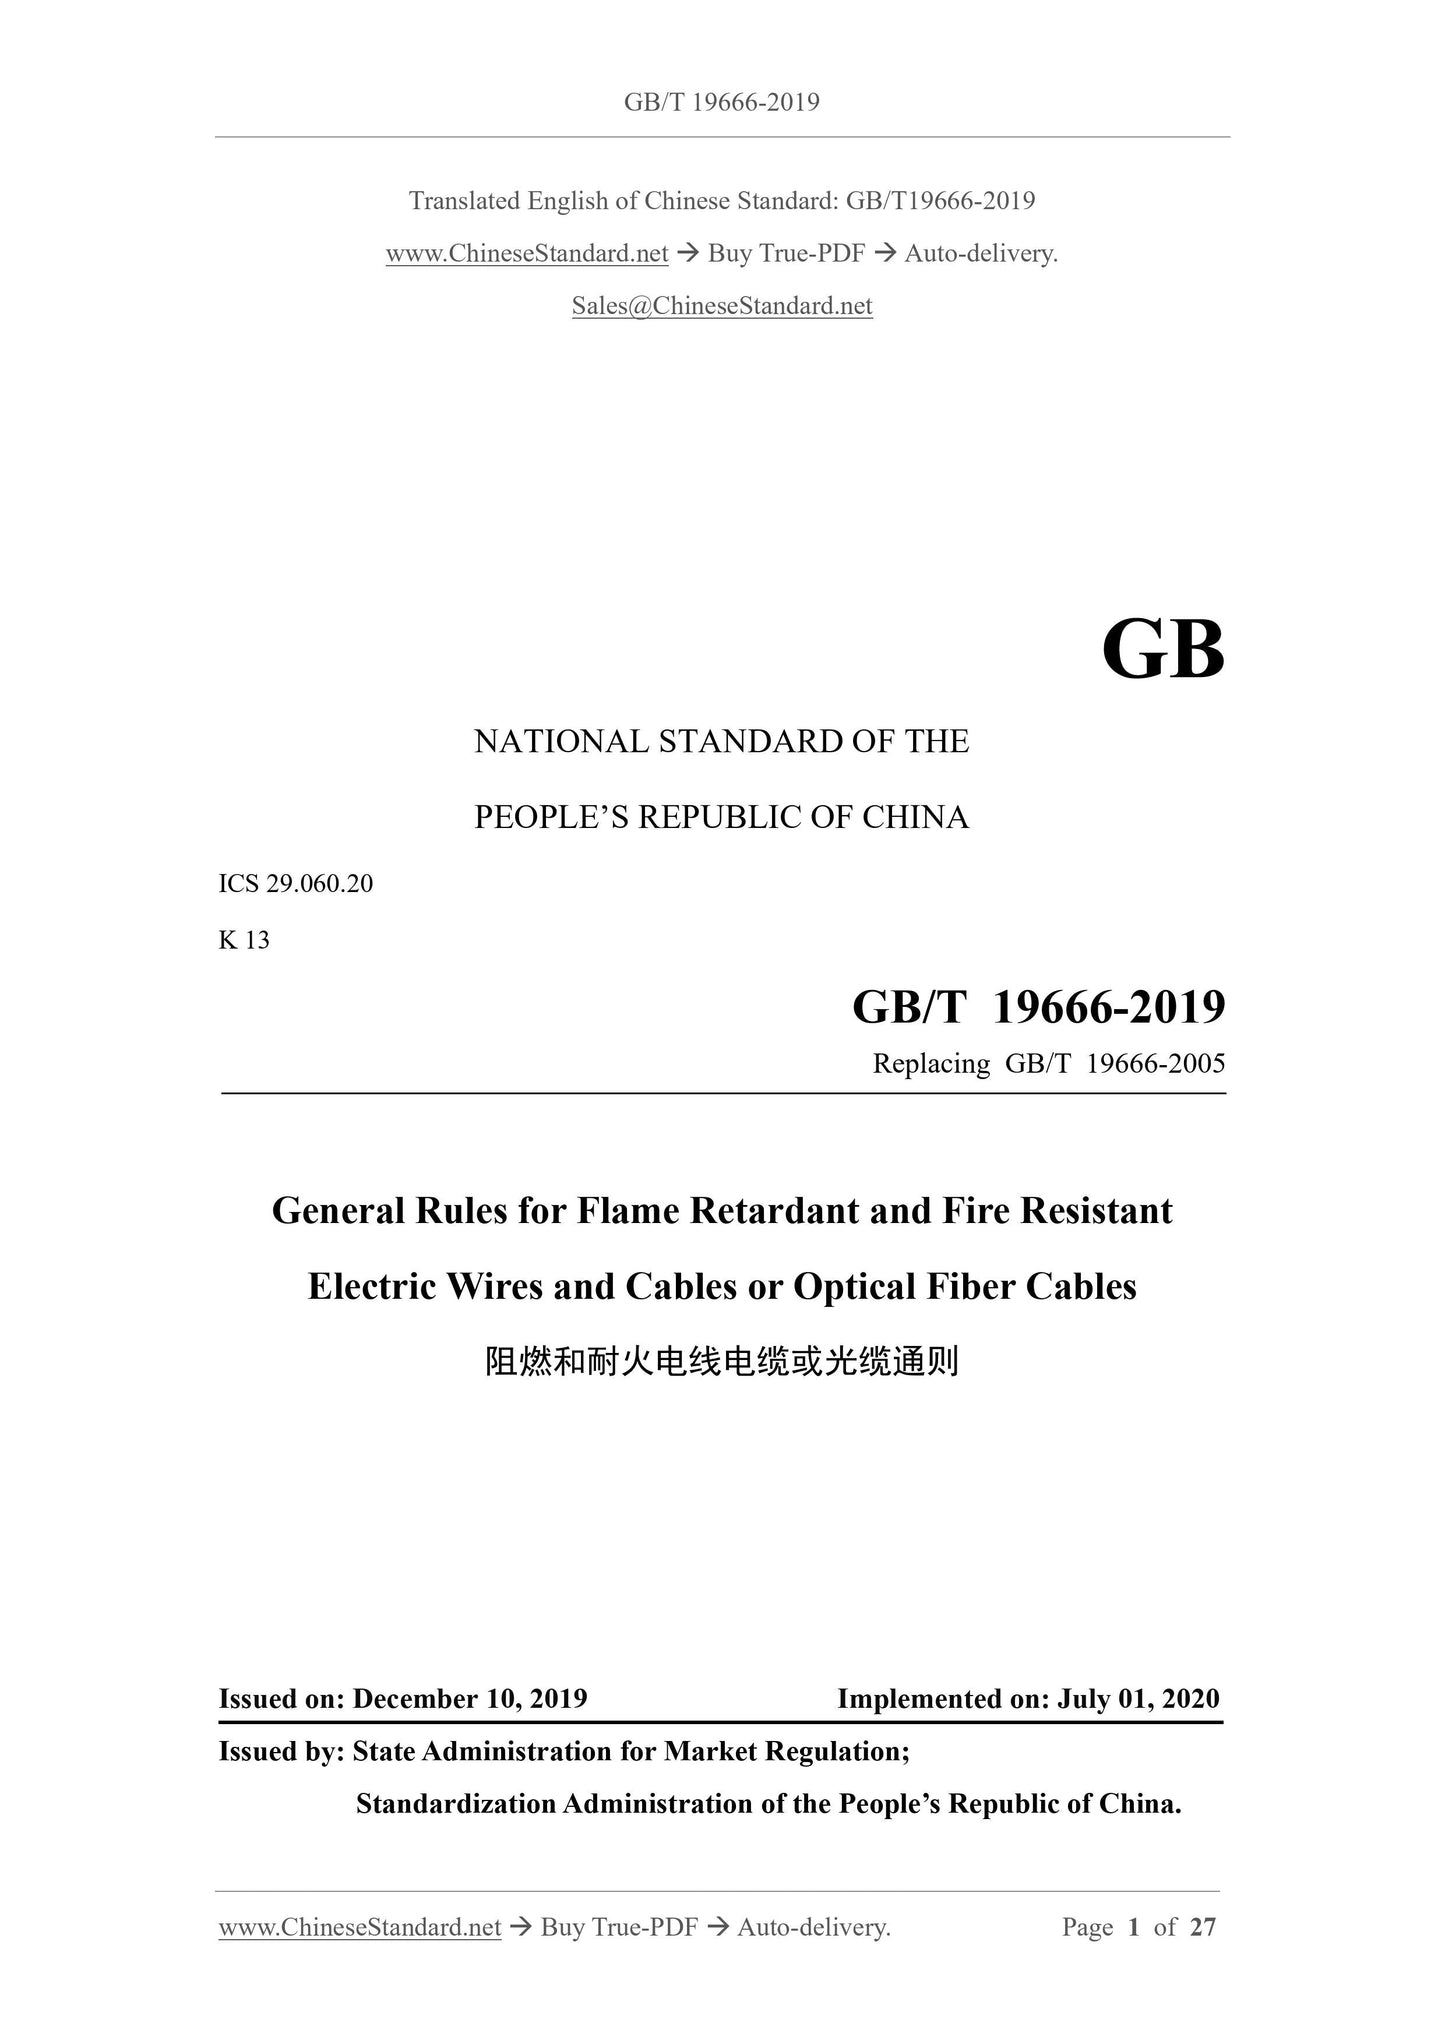 GB/T 19666-2019 Page 1